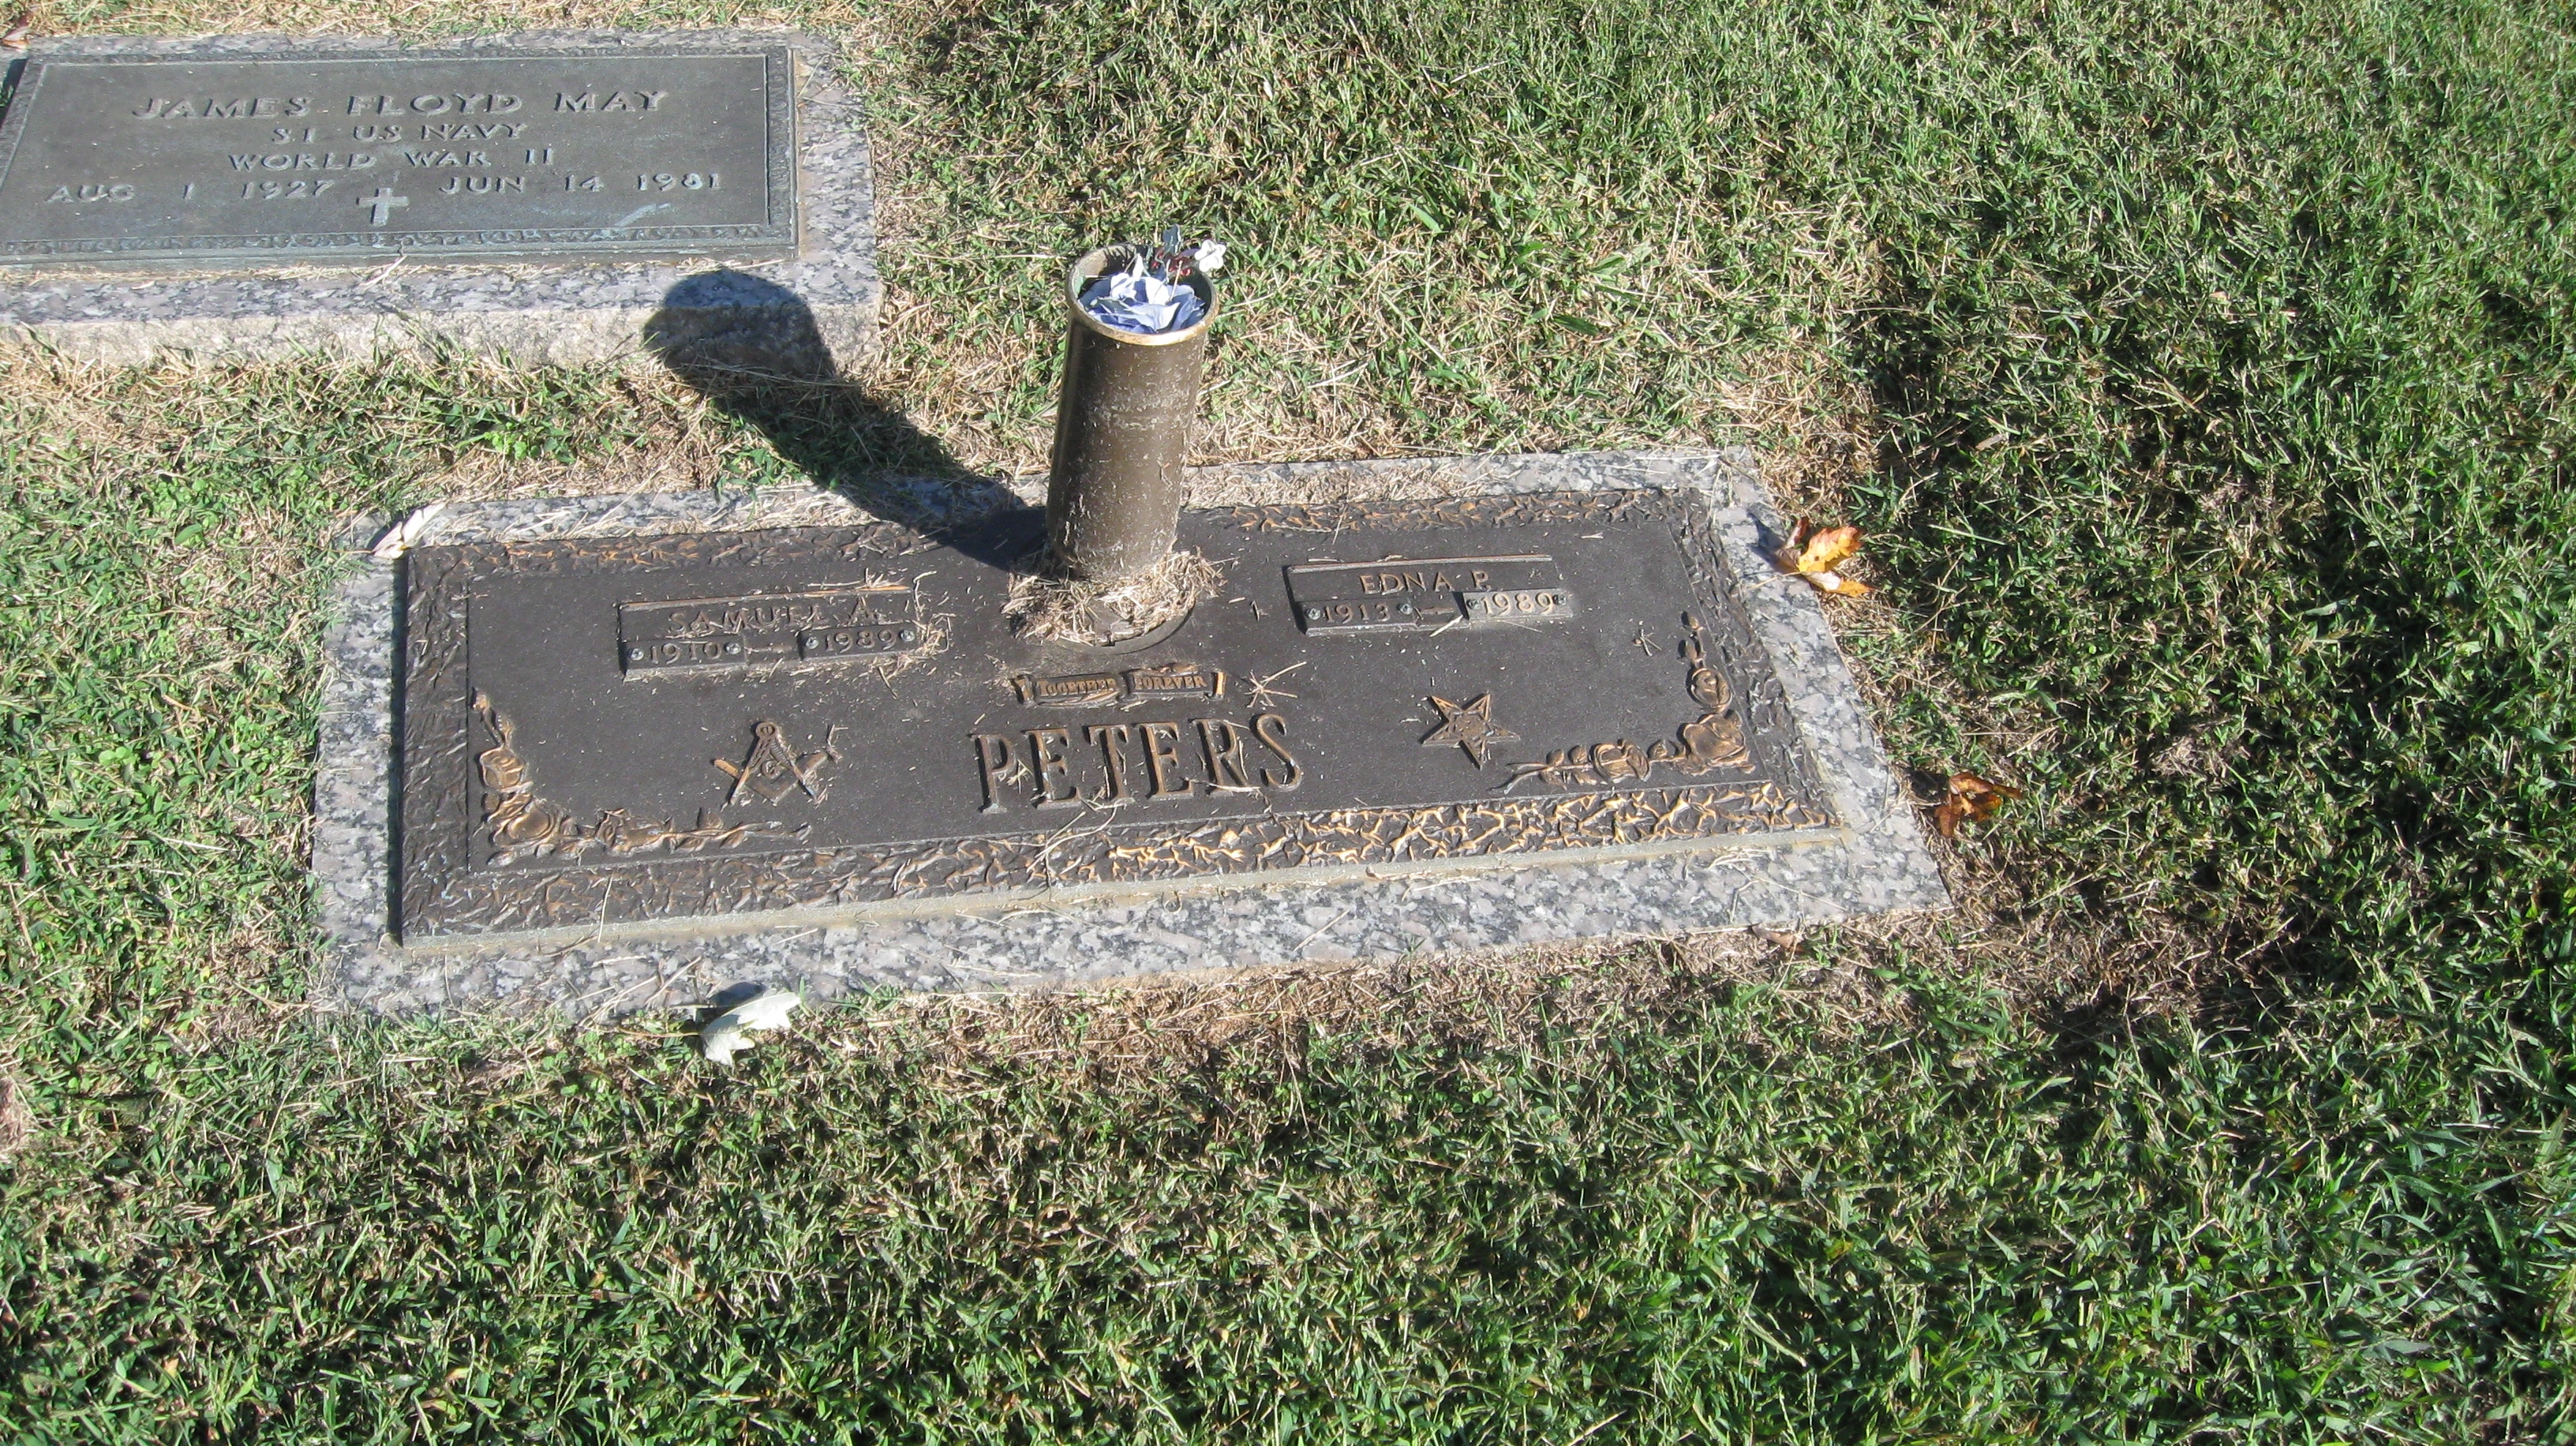 Arthur and Edna Peters Grave